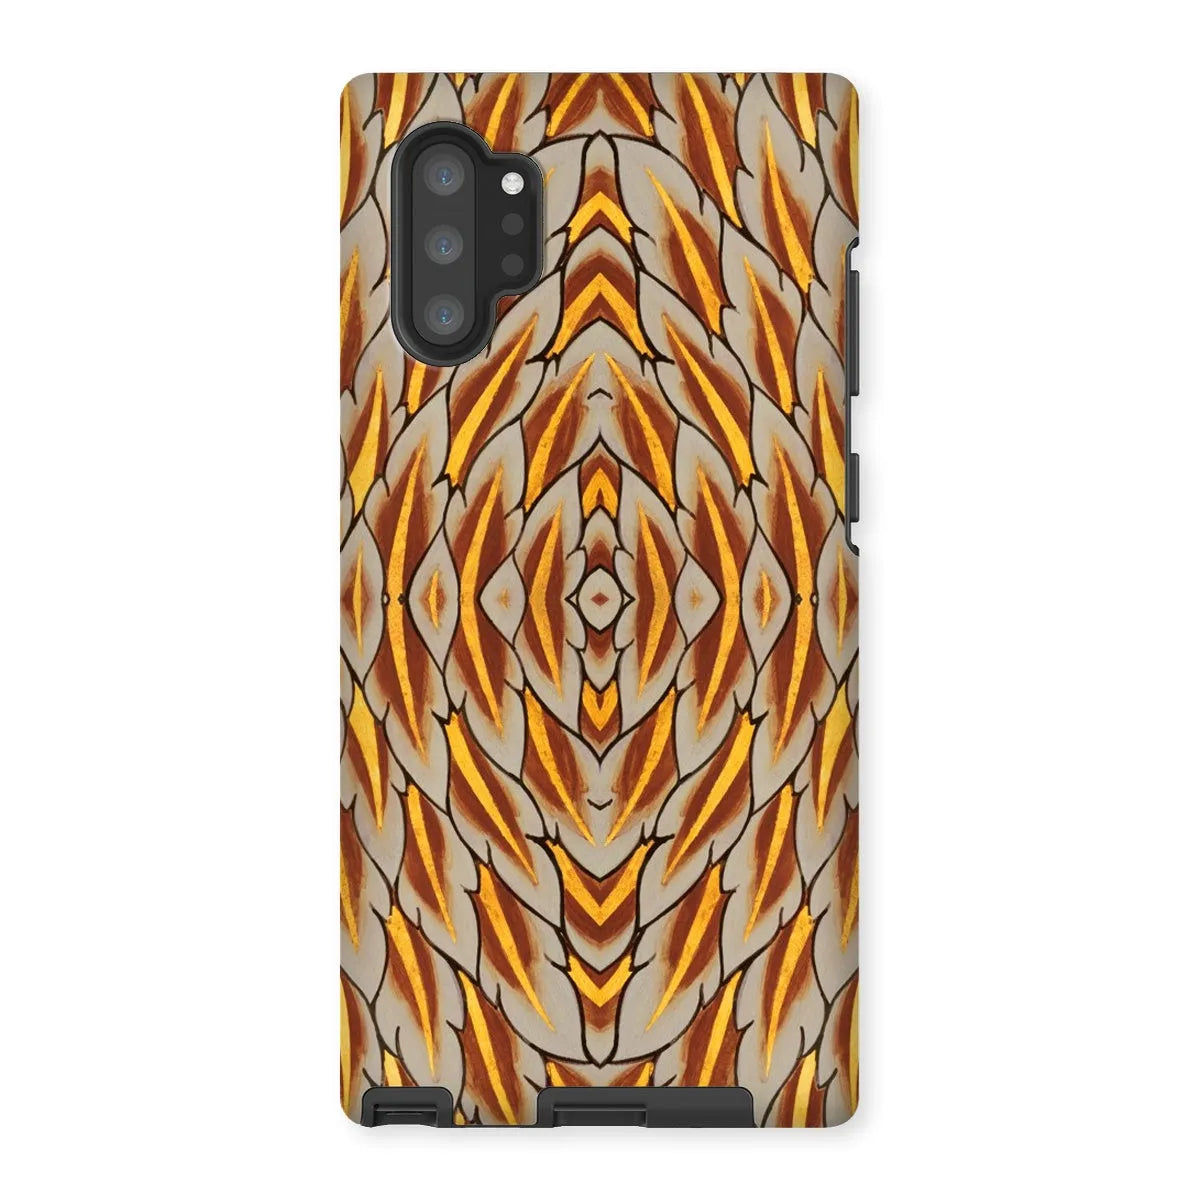 Featherweight Champion Thai Aesthetic Art Phone Case - Samsung Galaxy Note 10p / Matte - Mobile Phone Cases - Aesthetic